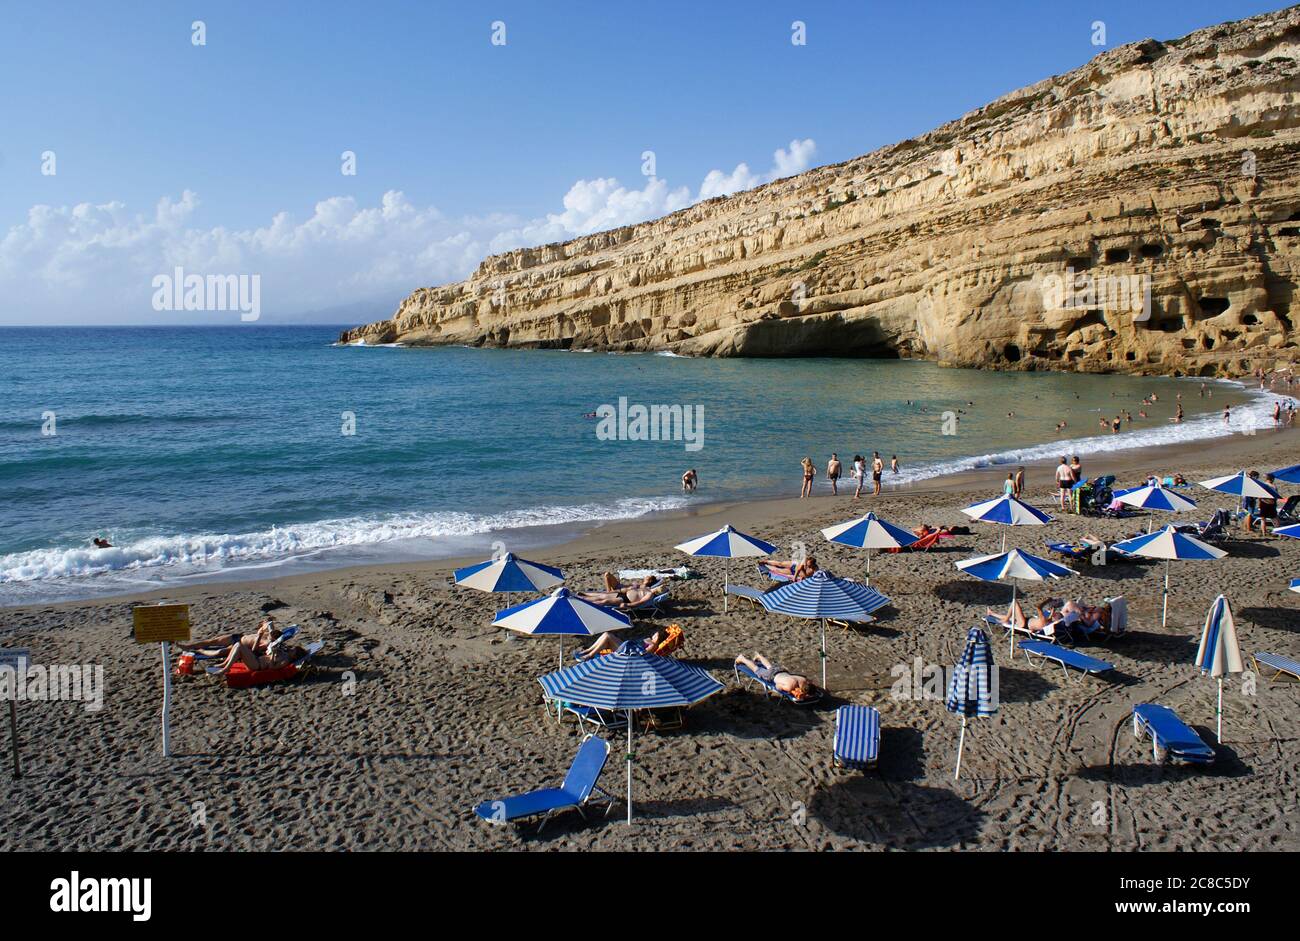 Matala, Crete / Greece / October 15 2010 : Holiday makers relax in the autumn sun at the beach at the charming village of Matala, Crete.  Beautiful ro Stock Photo